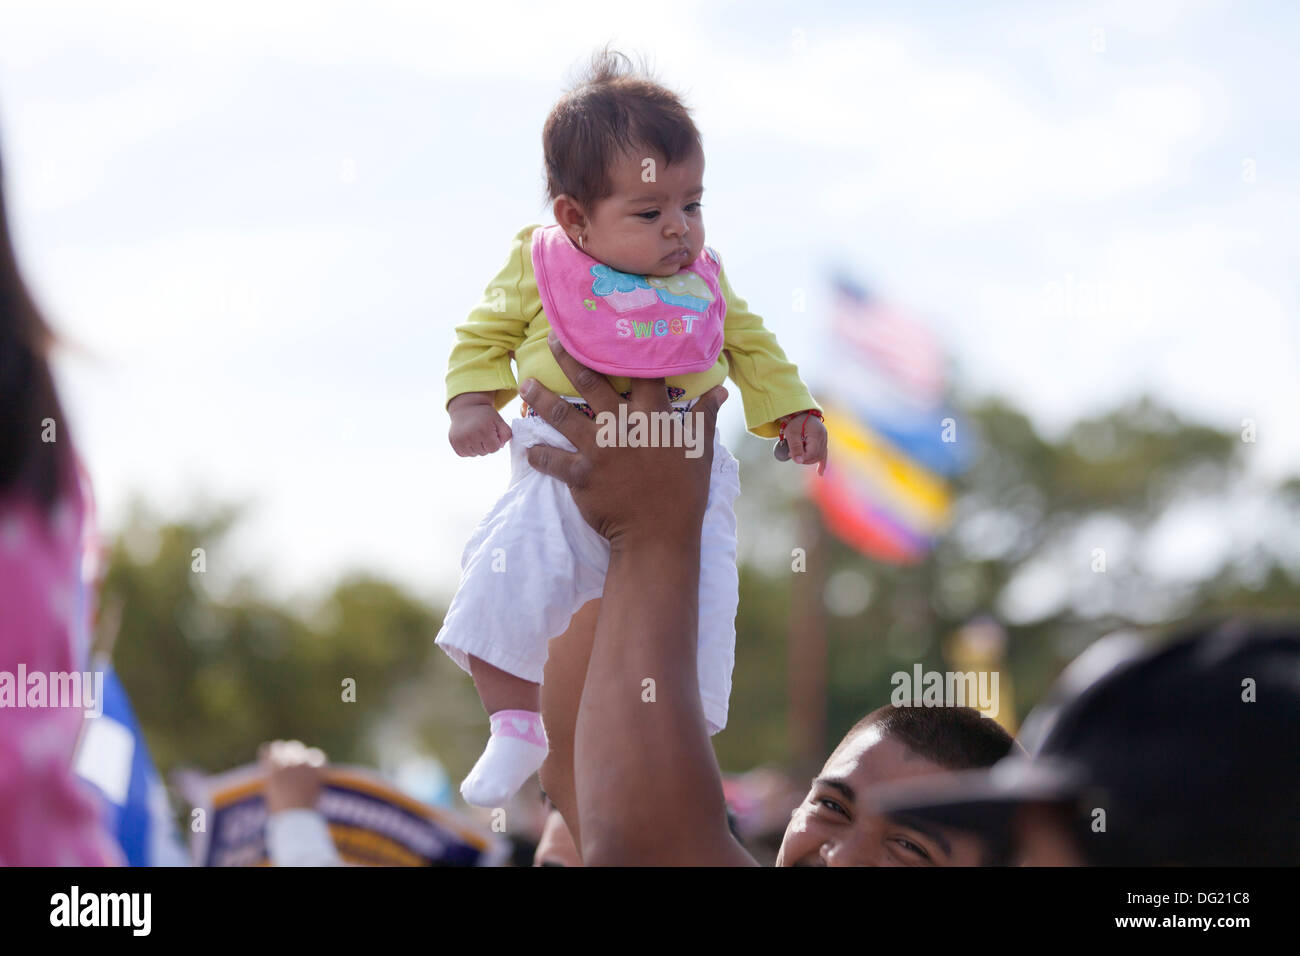 Man holding up infant baby over crowd at an outdoor event Stock Photo